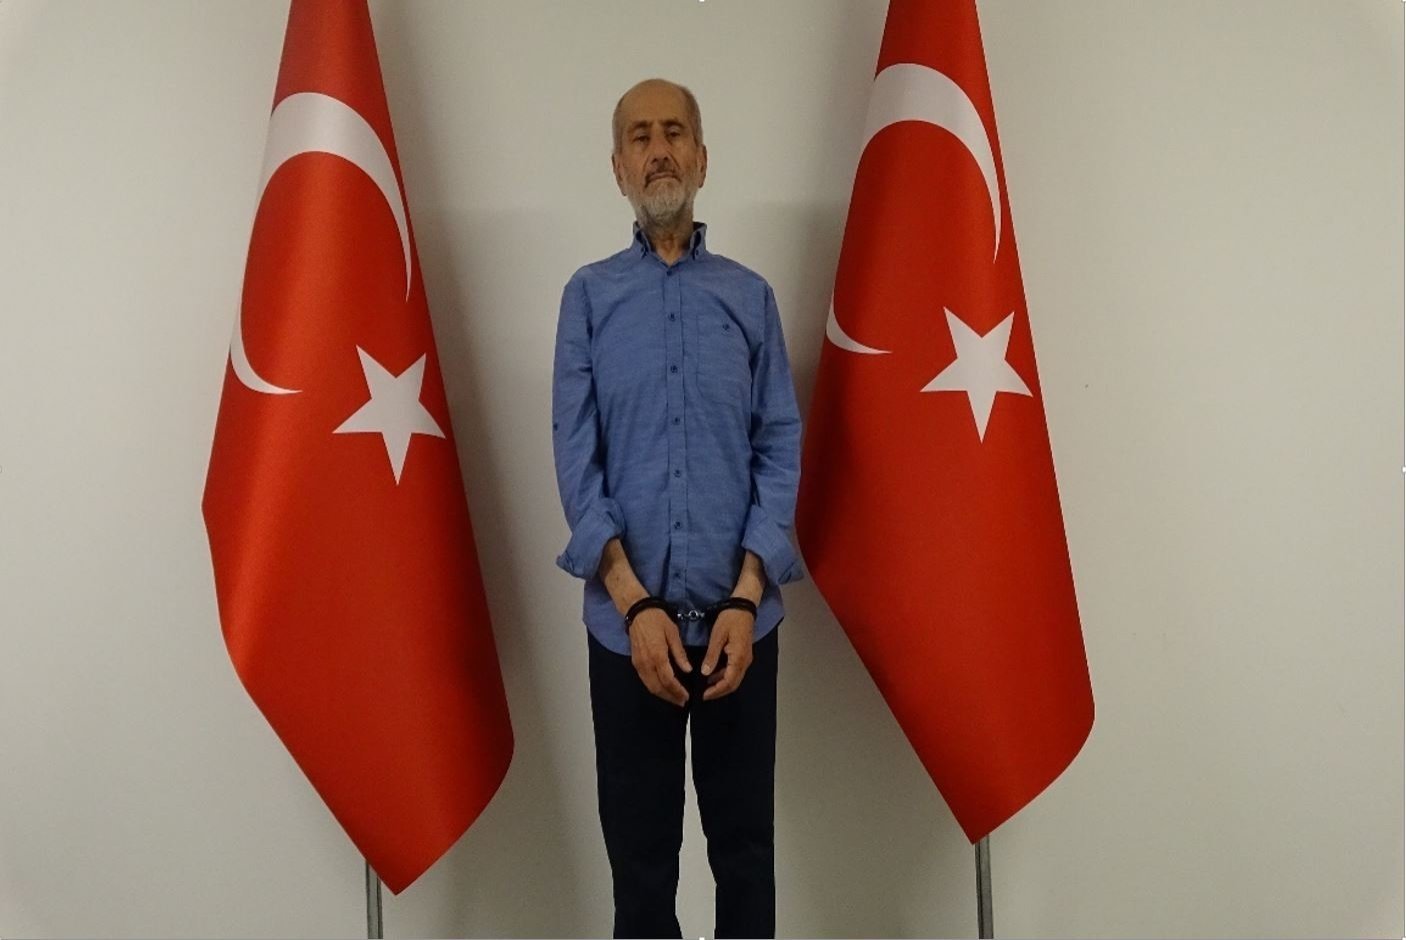 Greek National Intelligence Organization (EYP) spy Mohammed Amar Ampara, seen with handcuffs in front of two Turkish flags, after being caught by the National Intelligence Organization (MIT), Ankara, Türkiye, June 25, 2022. (DHA Photo)